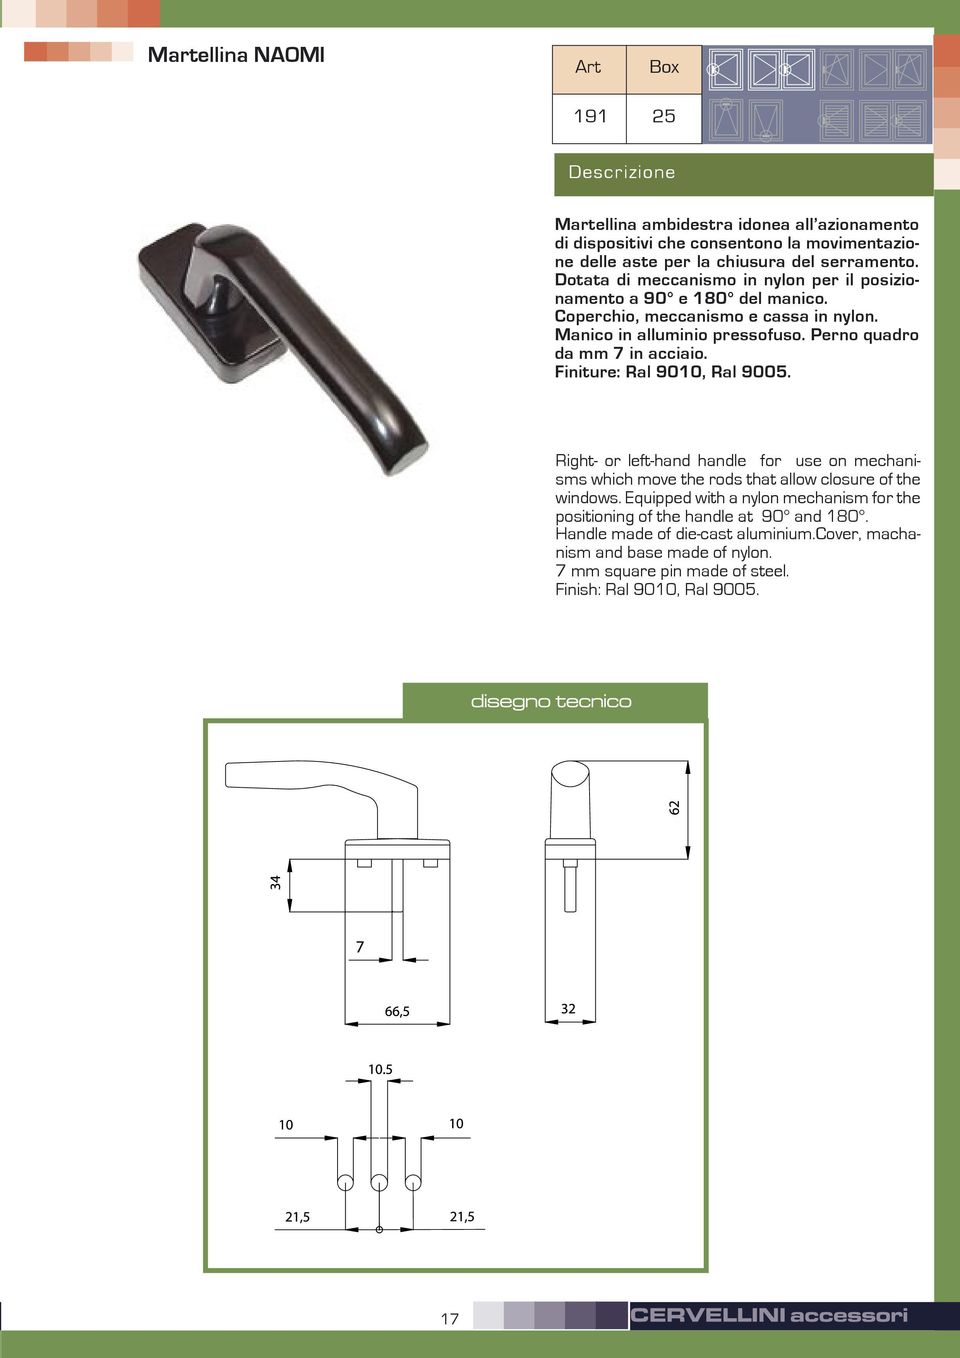 Perno quadro da mm 7 in acciaio. Finiture: Ral 9010, Ral 9005. Right- or left-hand handle for use on mechanisms which move the rods that allow closure of the windows.